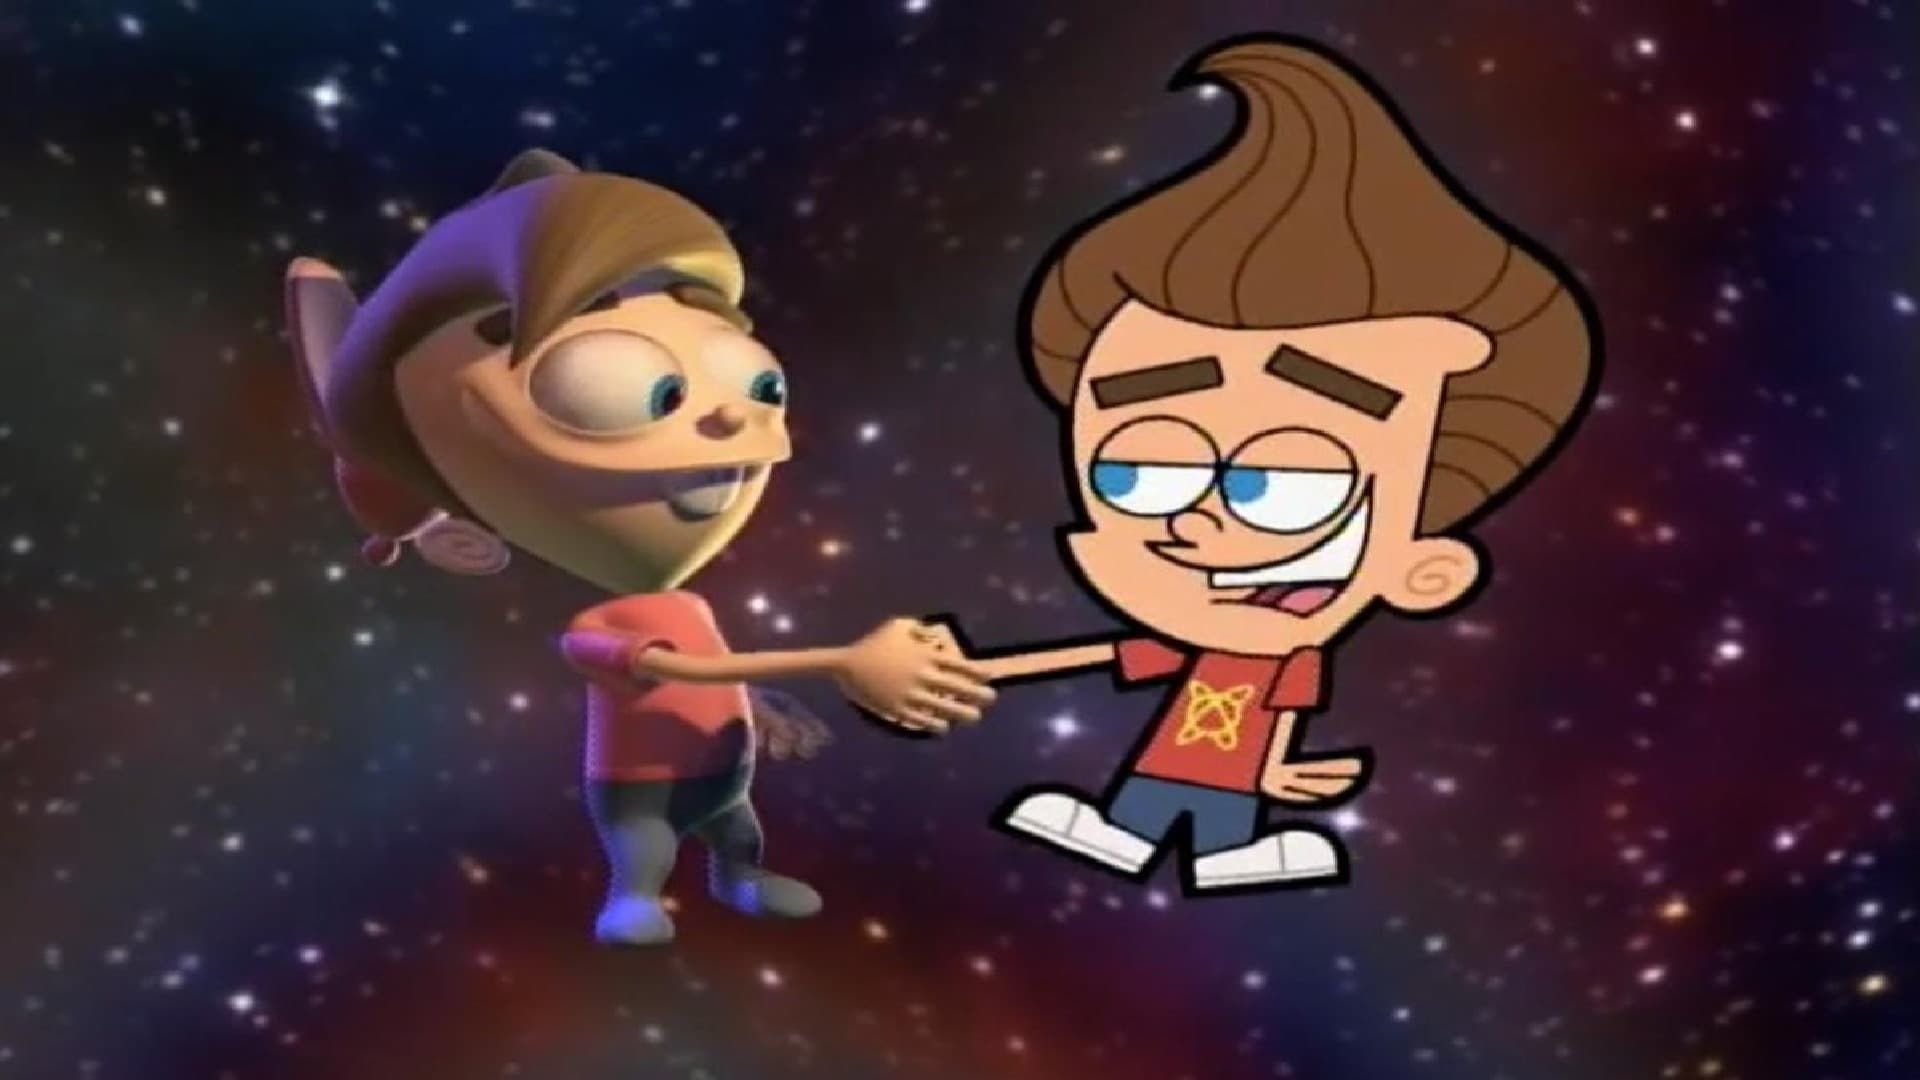 The Jimmy Timmy Power Hour background